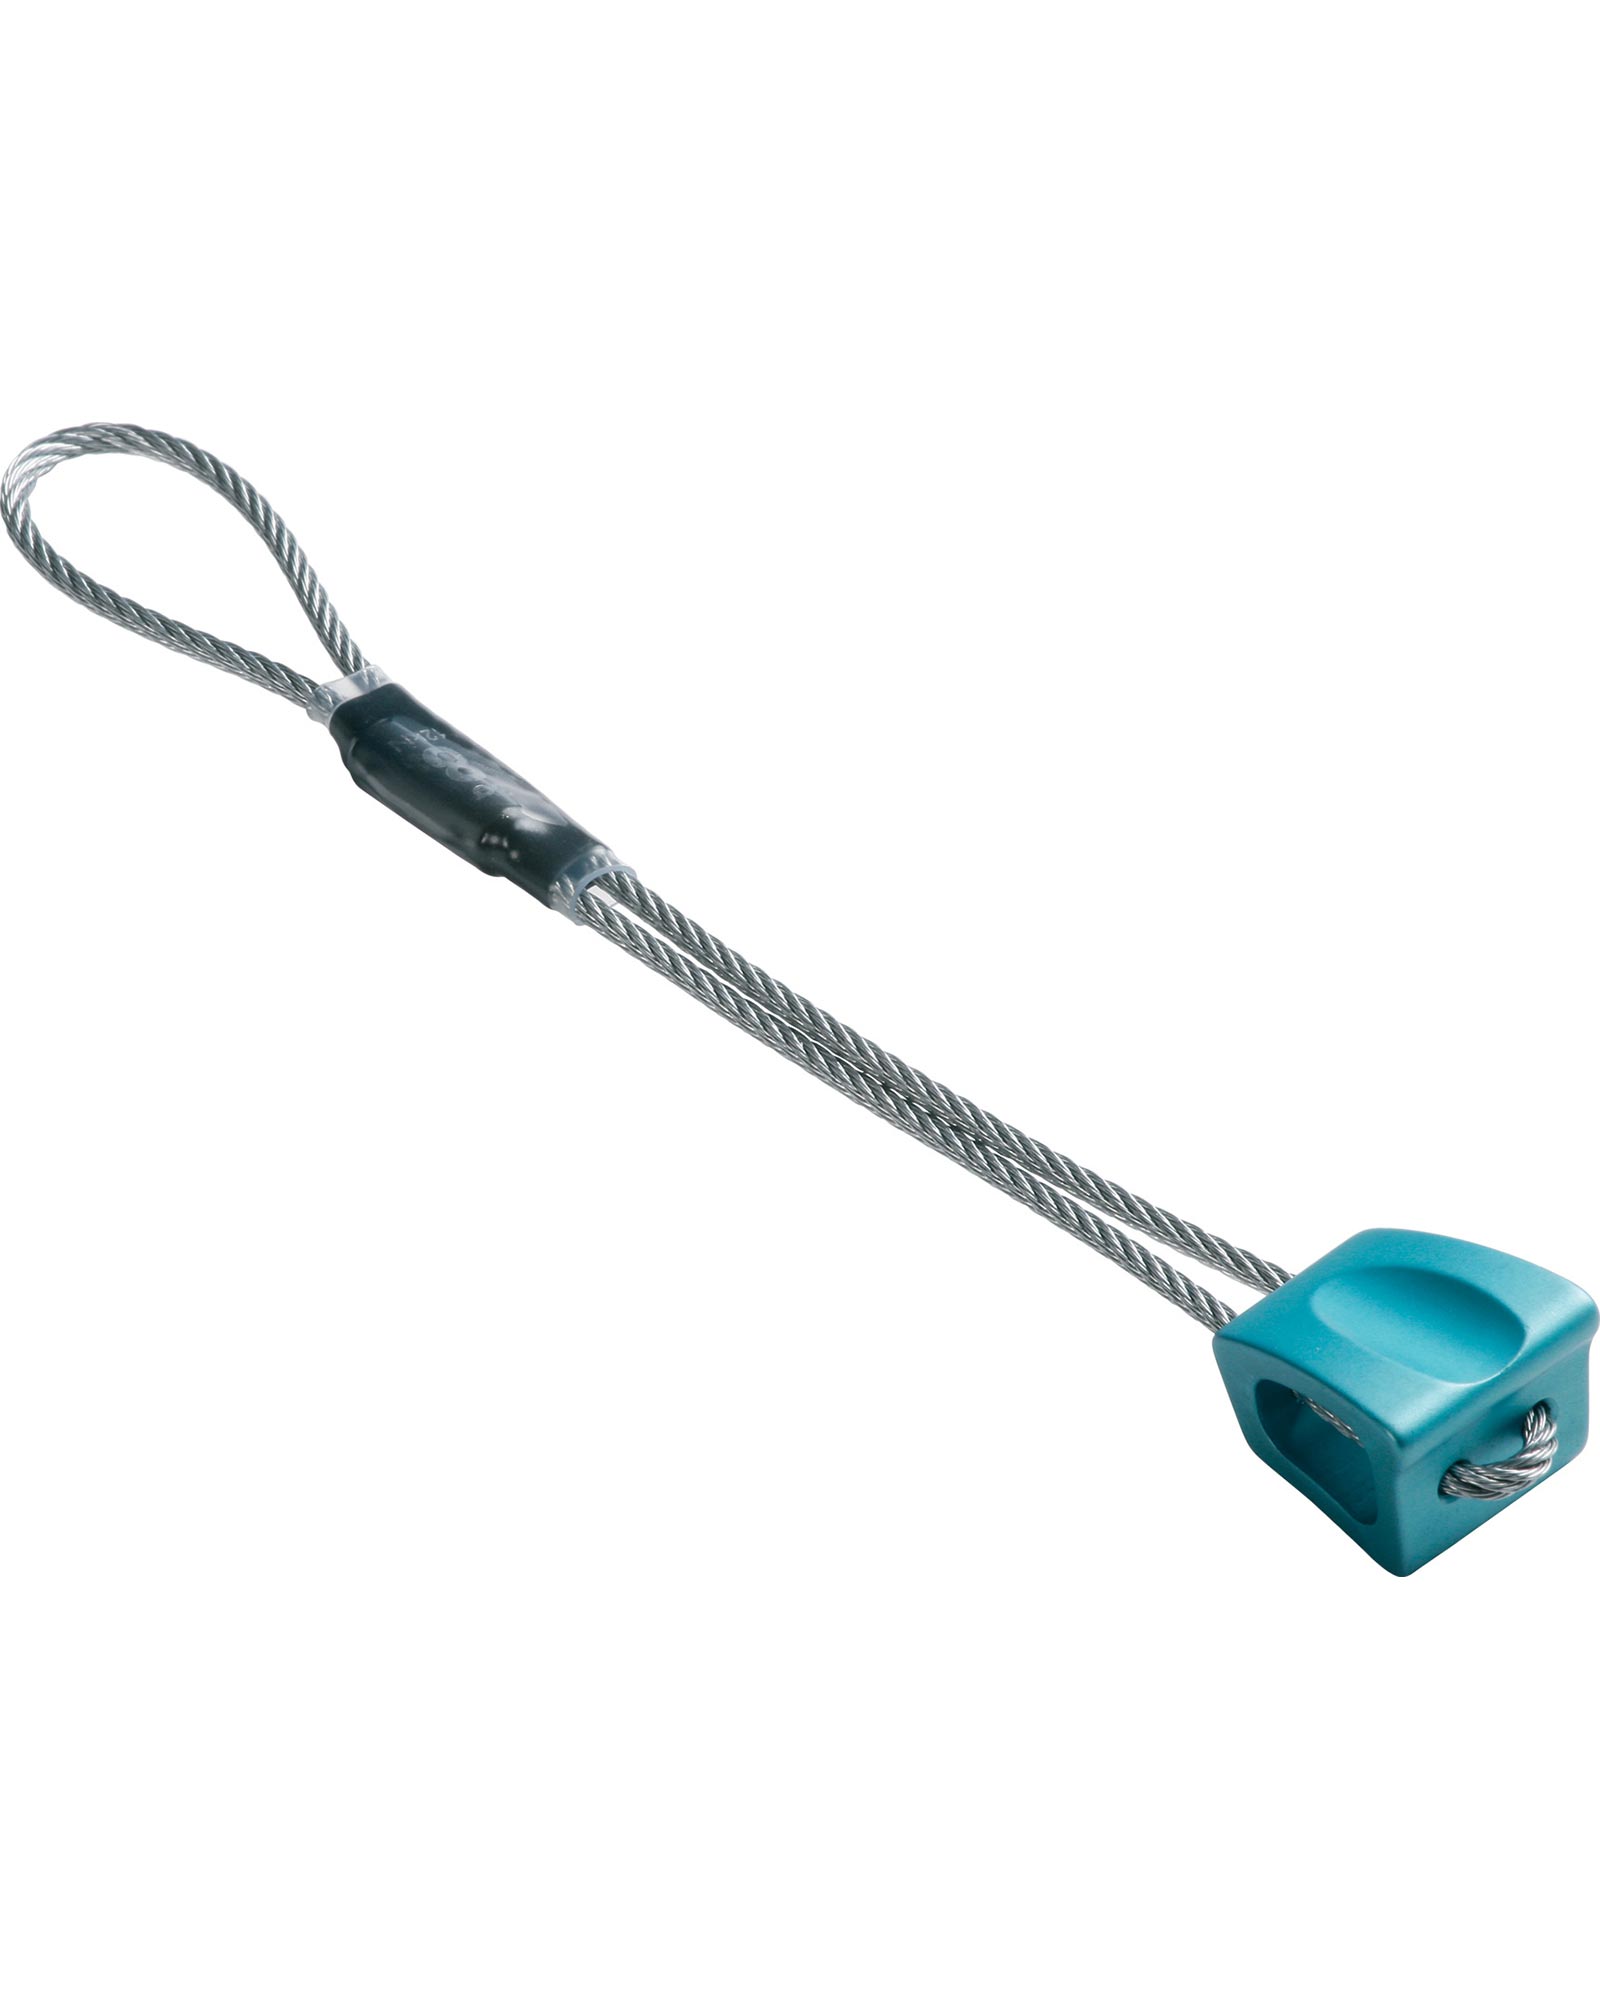 DMM Anodised Wallnuts on Wire   Size 8 - Turquoise